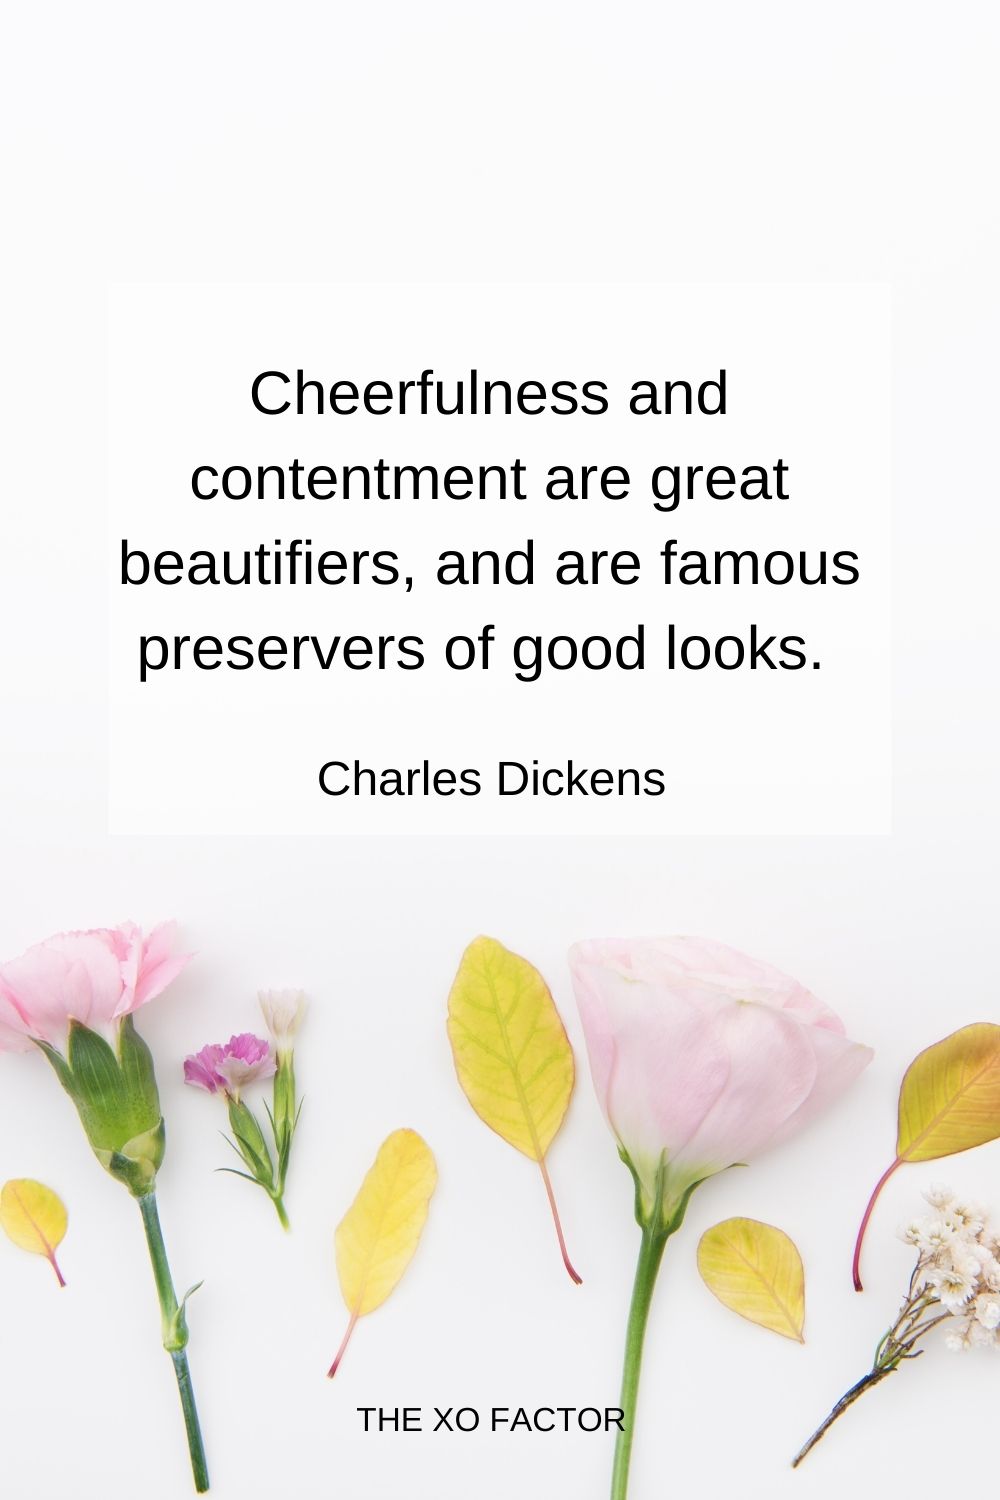 Cheerfulness and contentment are great beautifiers, and are famous preservers of good looks.  Charles Dickens